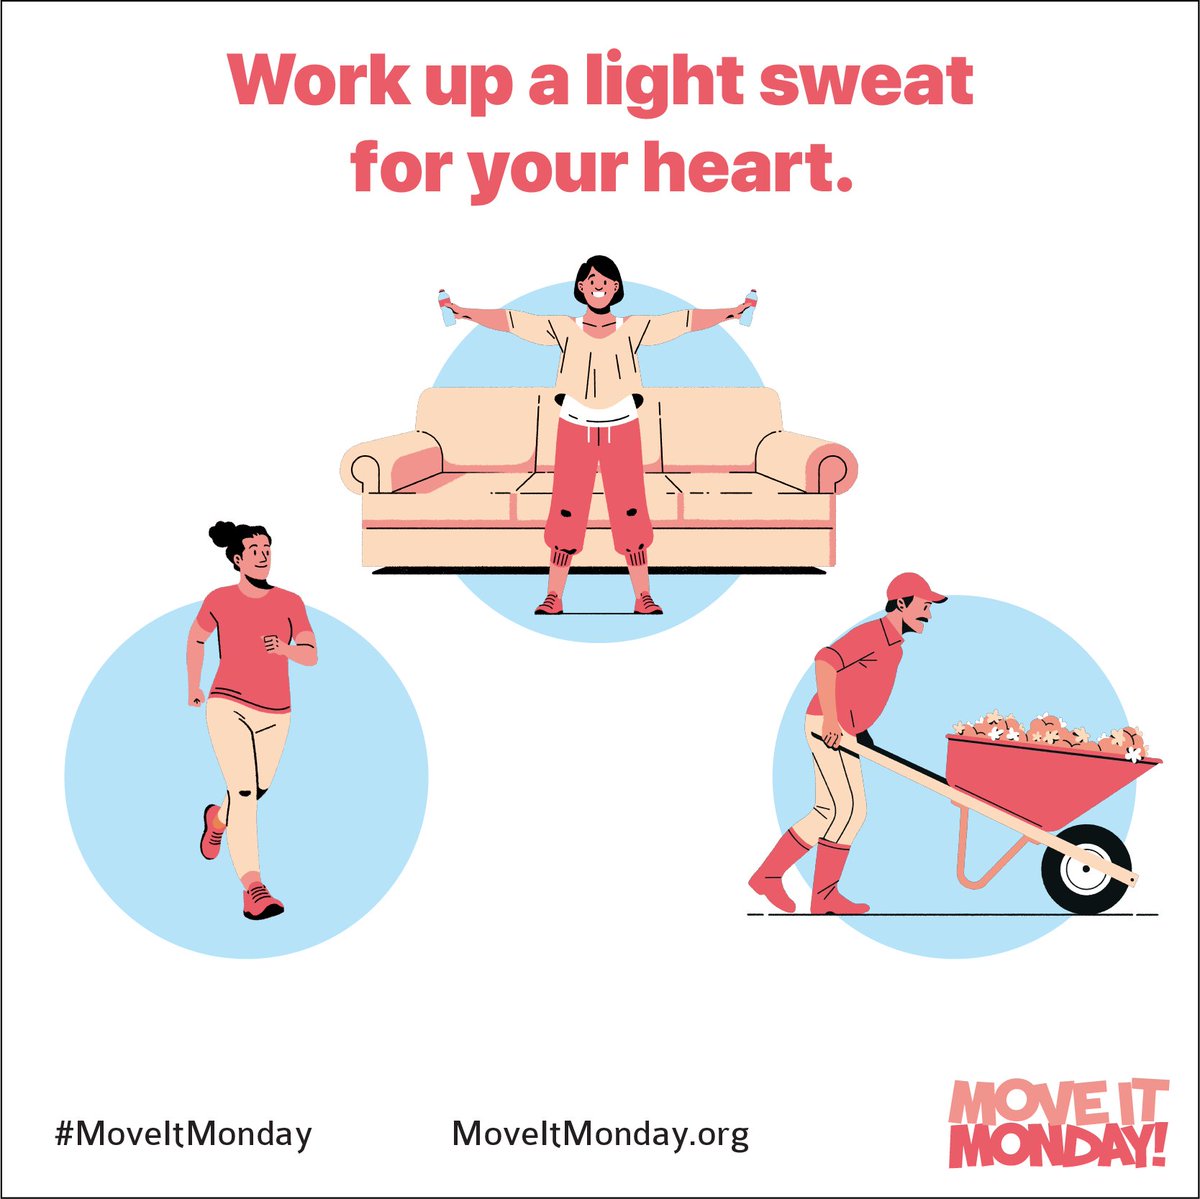 Commit to a month of @HealthyMonday workouts to help your heart thrive for #HeartMonth! Learn how even a light #MoveItMonday workout can make a difference in reducing your risk of heart disease at: ow.ly/2fP950QuUos